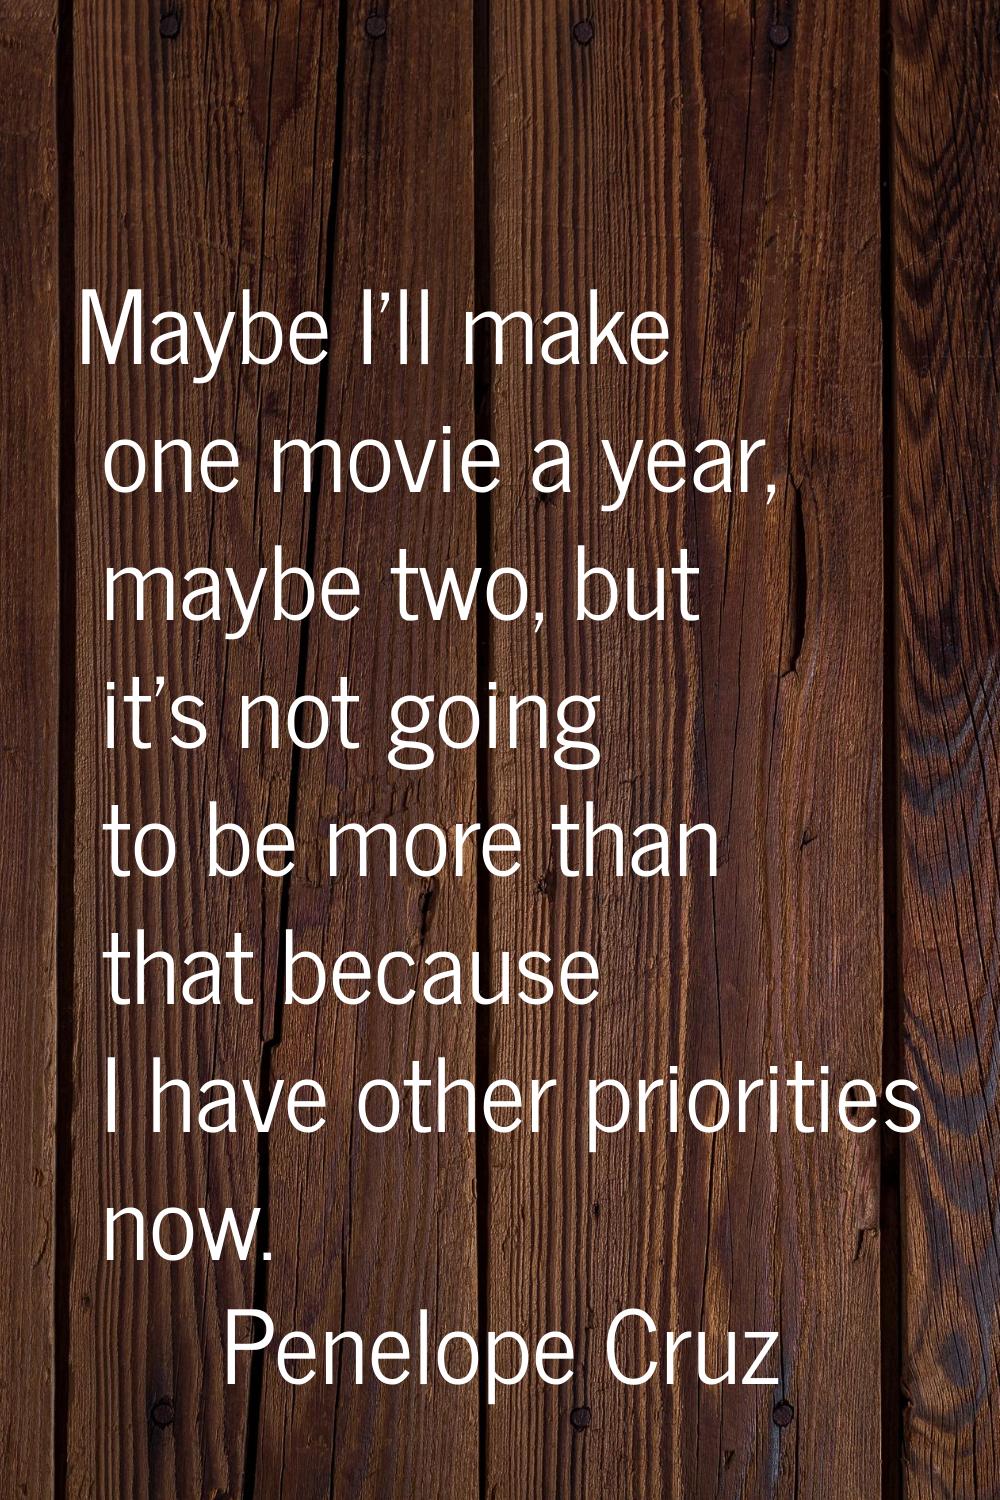 Maybe I'll make one movie a year, maybe two, but it's not going to be more than that because I have